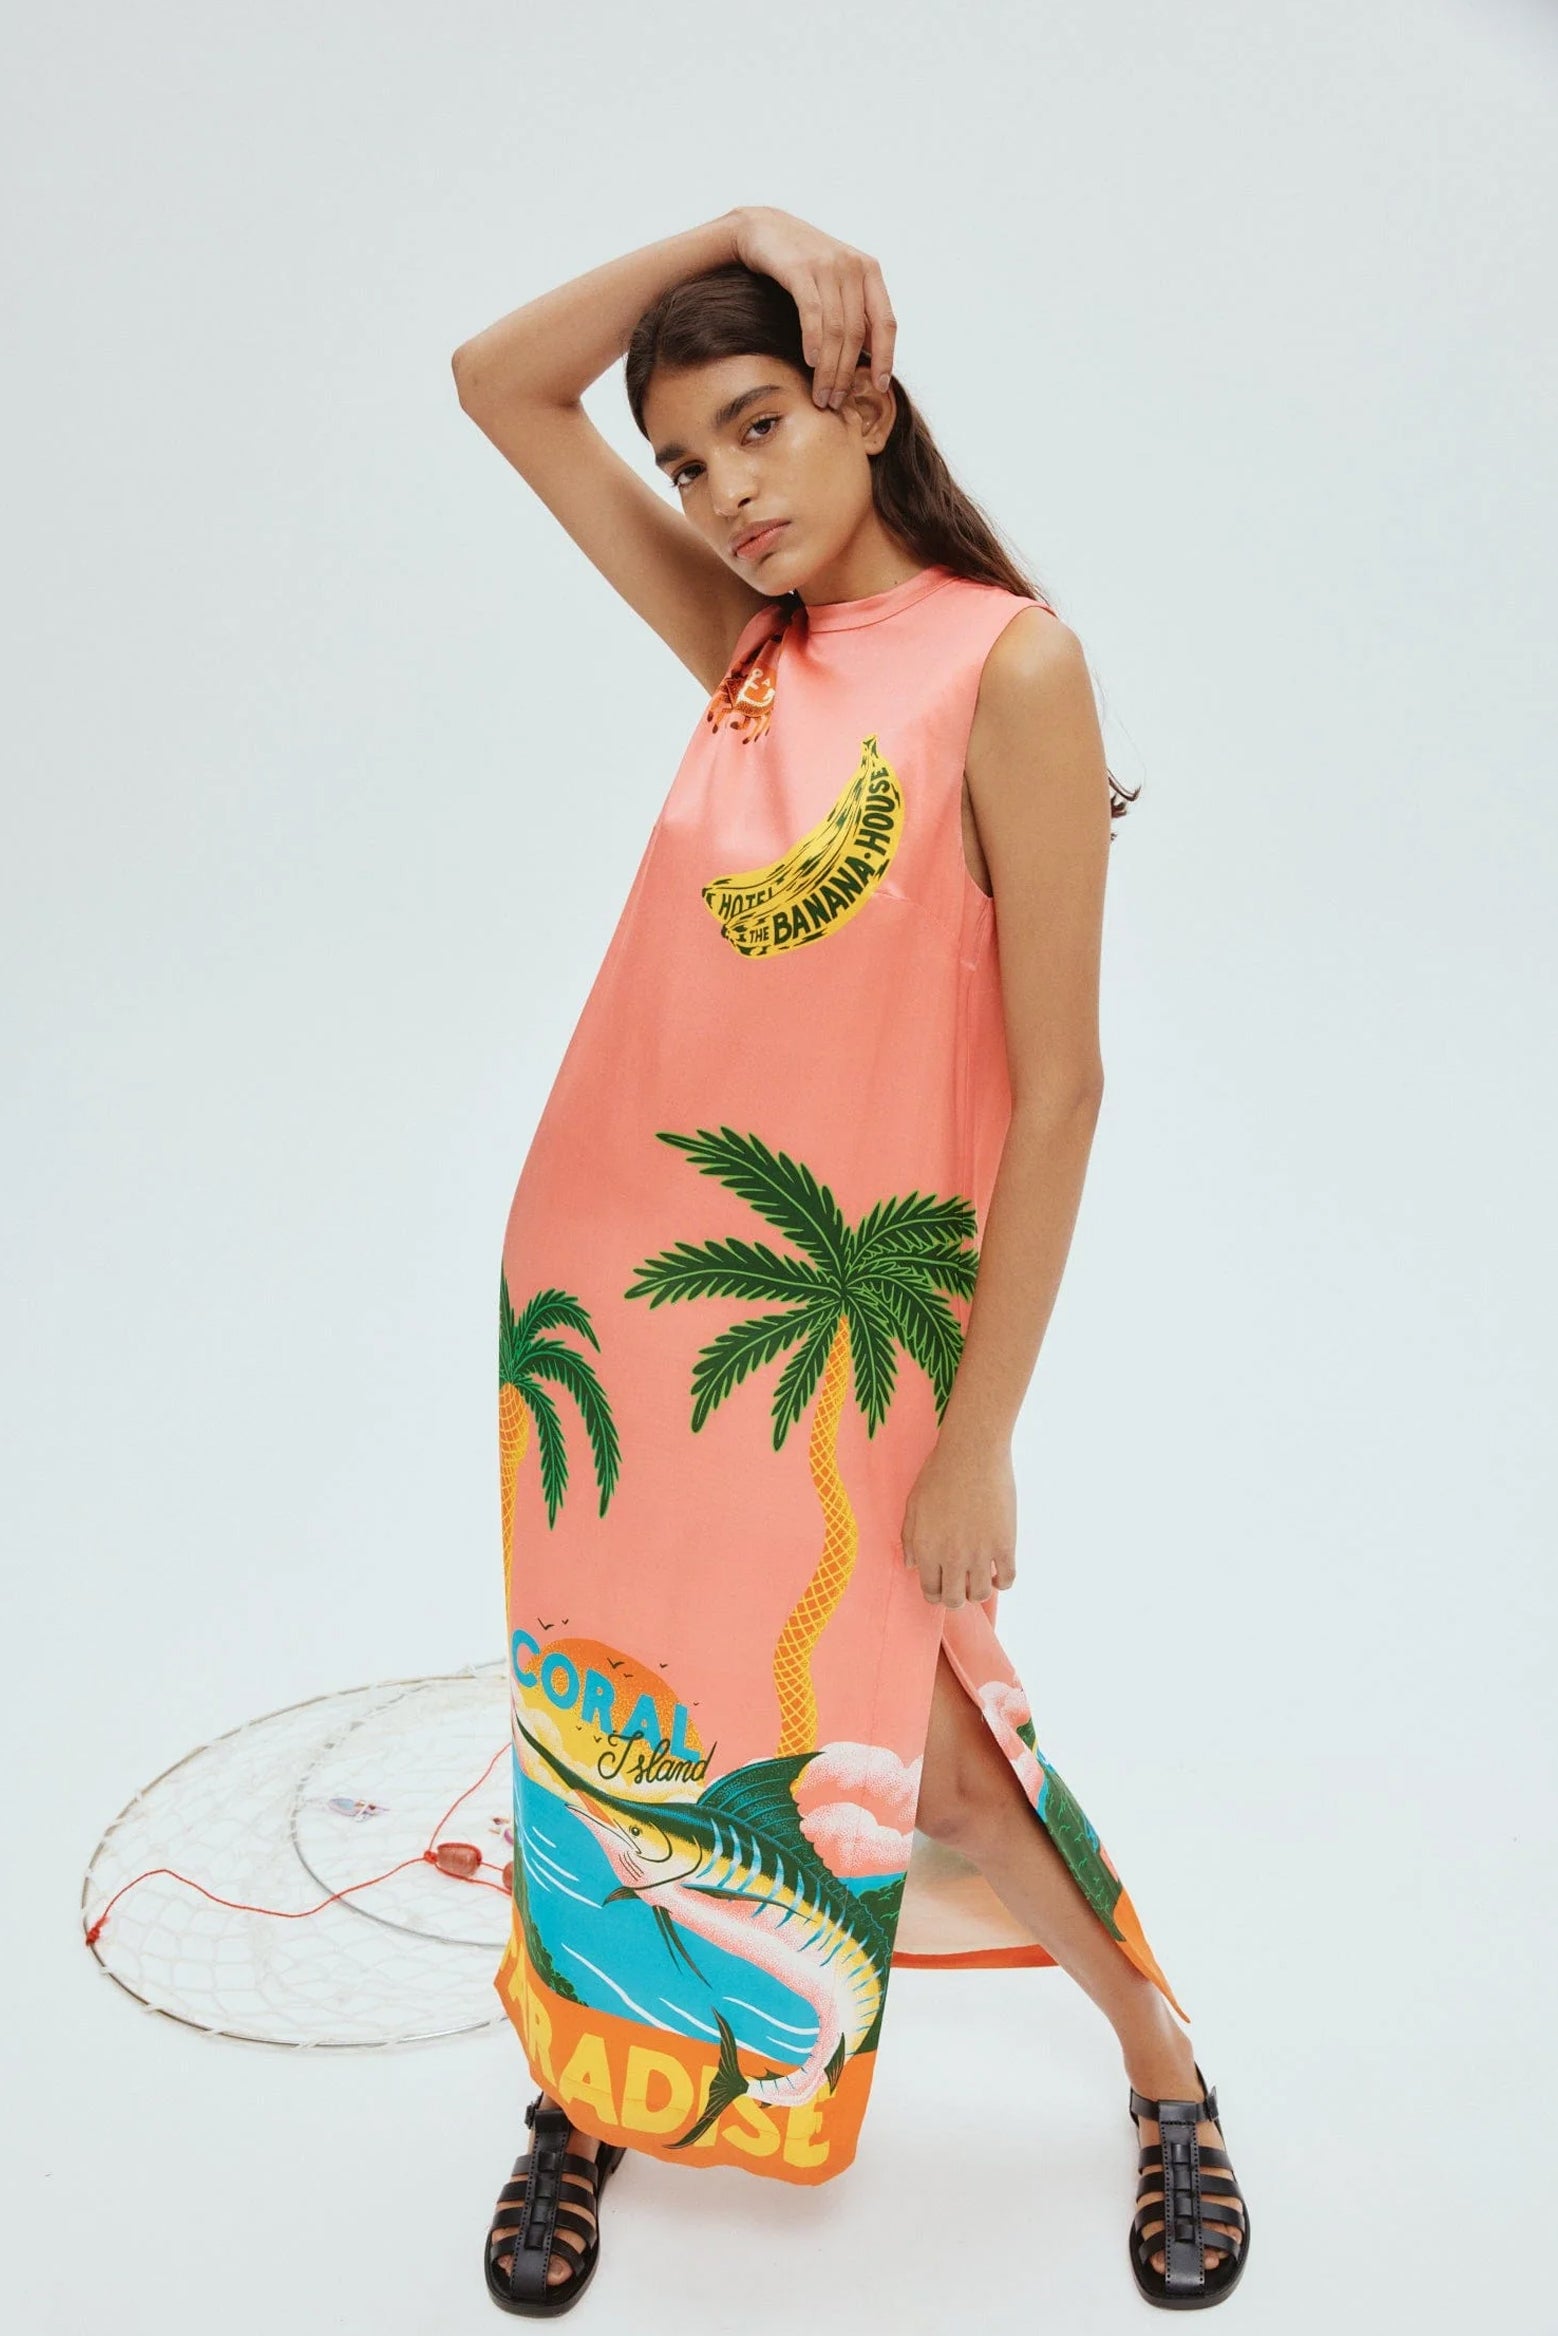 Alemais Paradiso Silk Midi Dress in Multi available at The New Trend Australia.